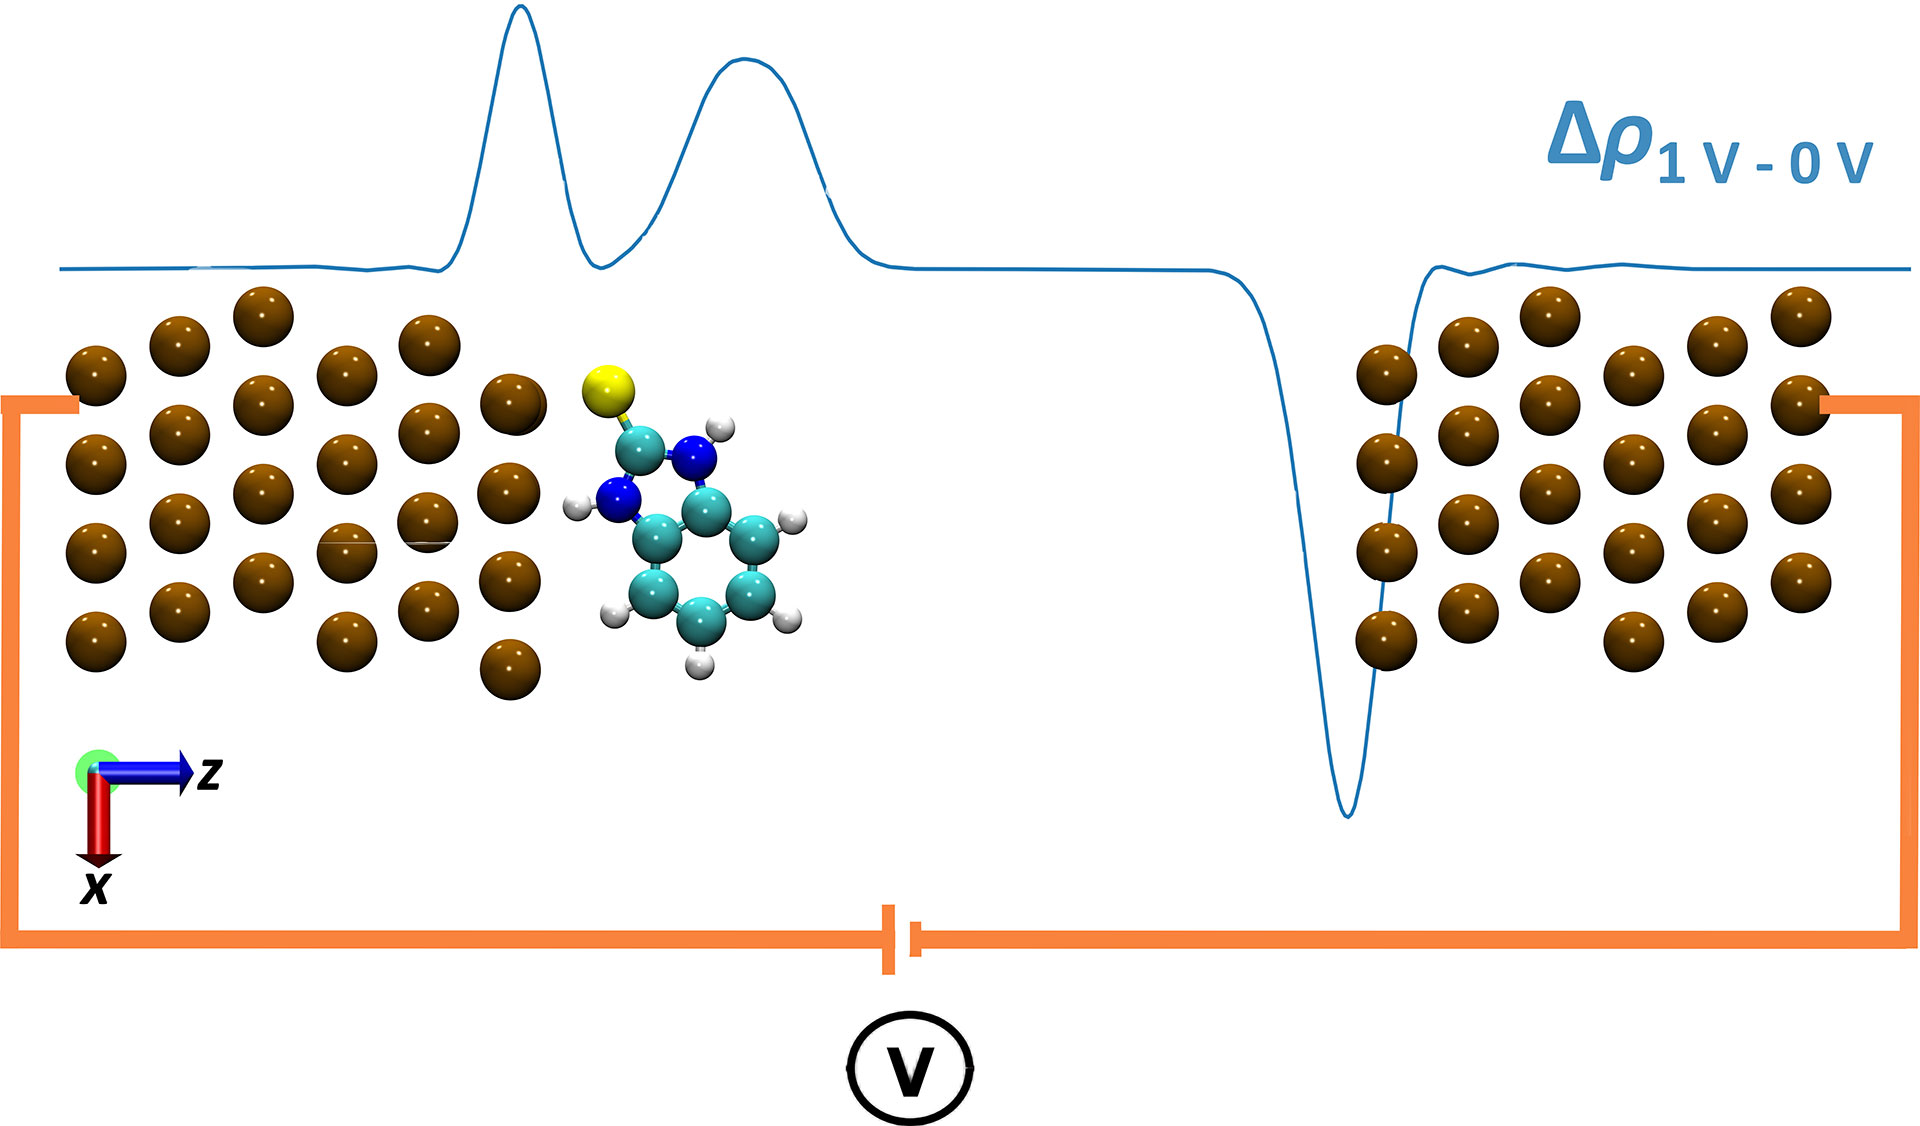 Electronic density difference (Δρ) between 1 V & 0 V for the adsorption of 2-mercaptobenzimidazole on a Cu surface. Ochre, yellow, turquoise, blue, and white-coloured spheres represent Cu, S, C, N, and H atoms.